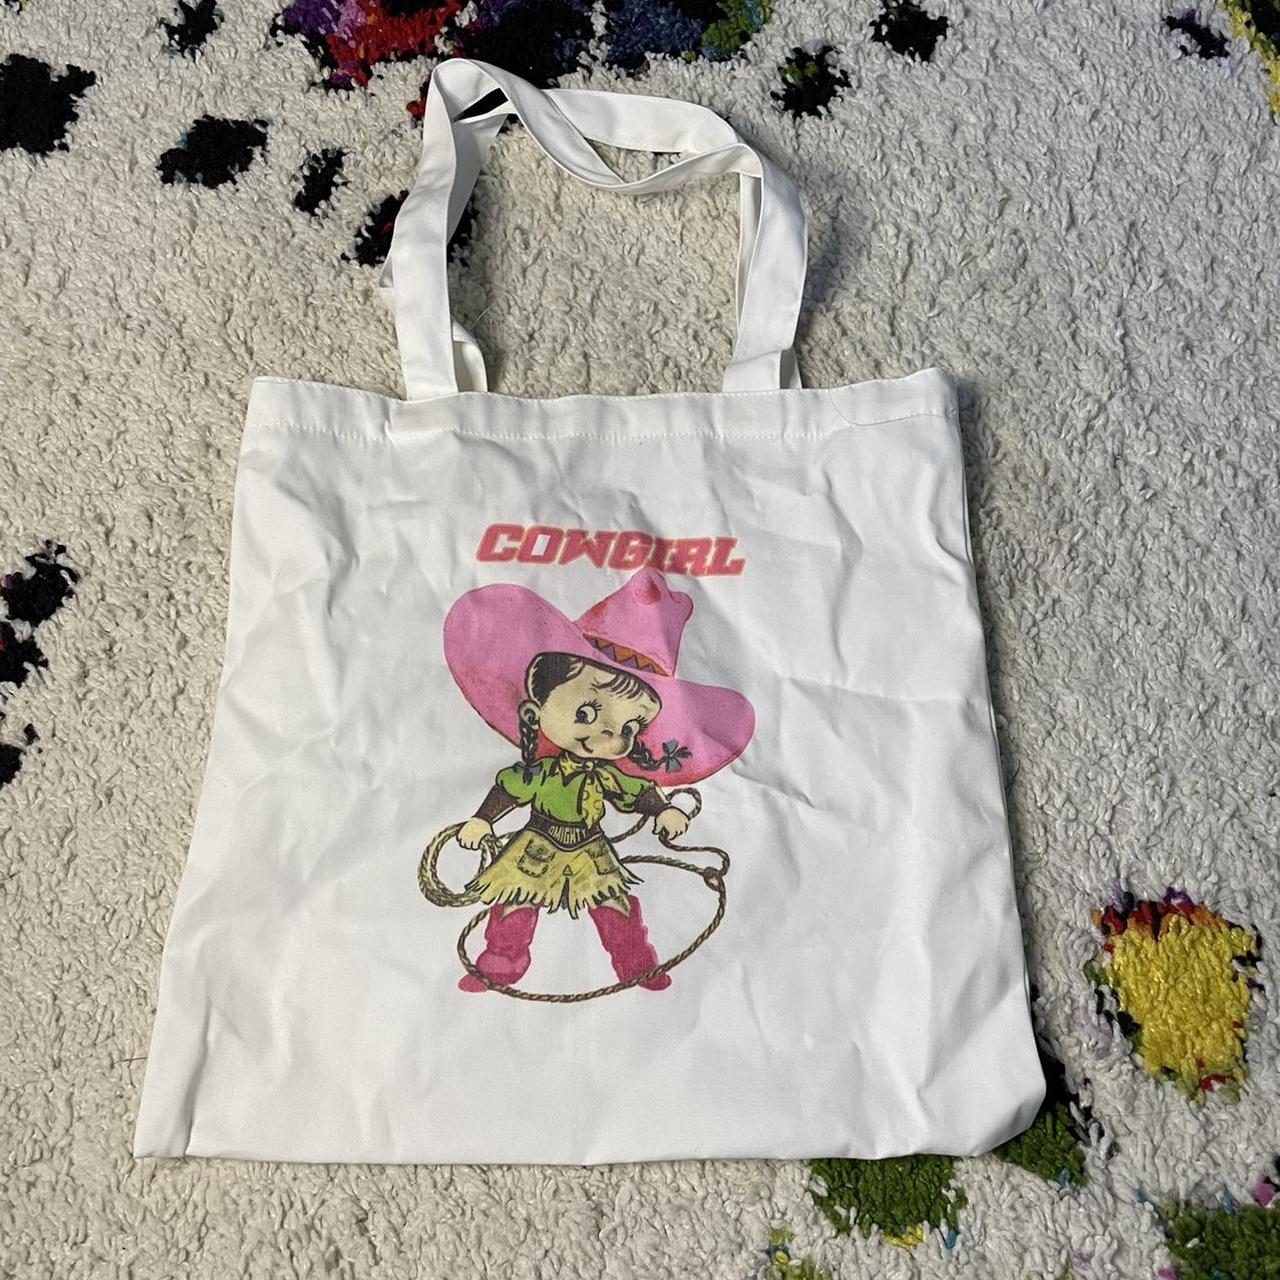 Product Image 1 - Omighty cowgirl tote bag
#totebag #omighty